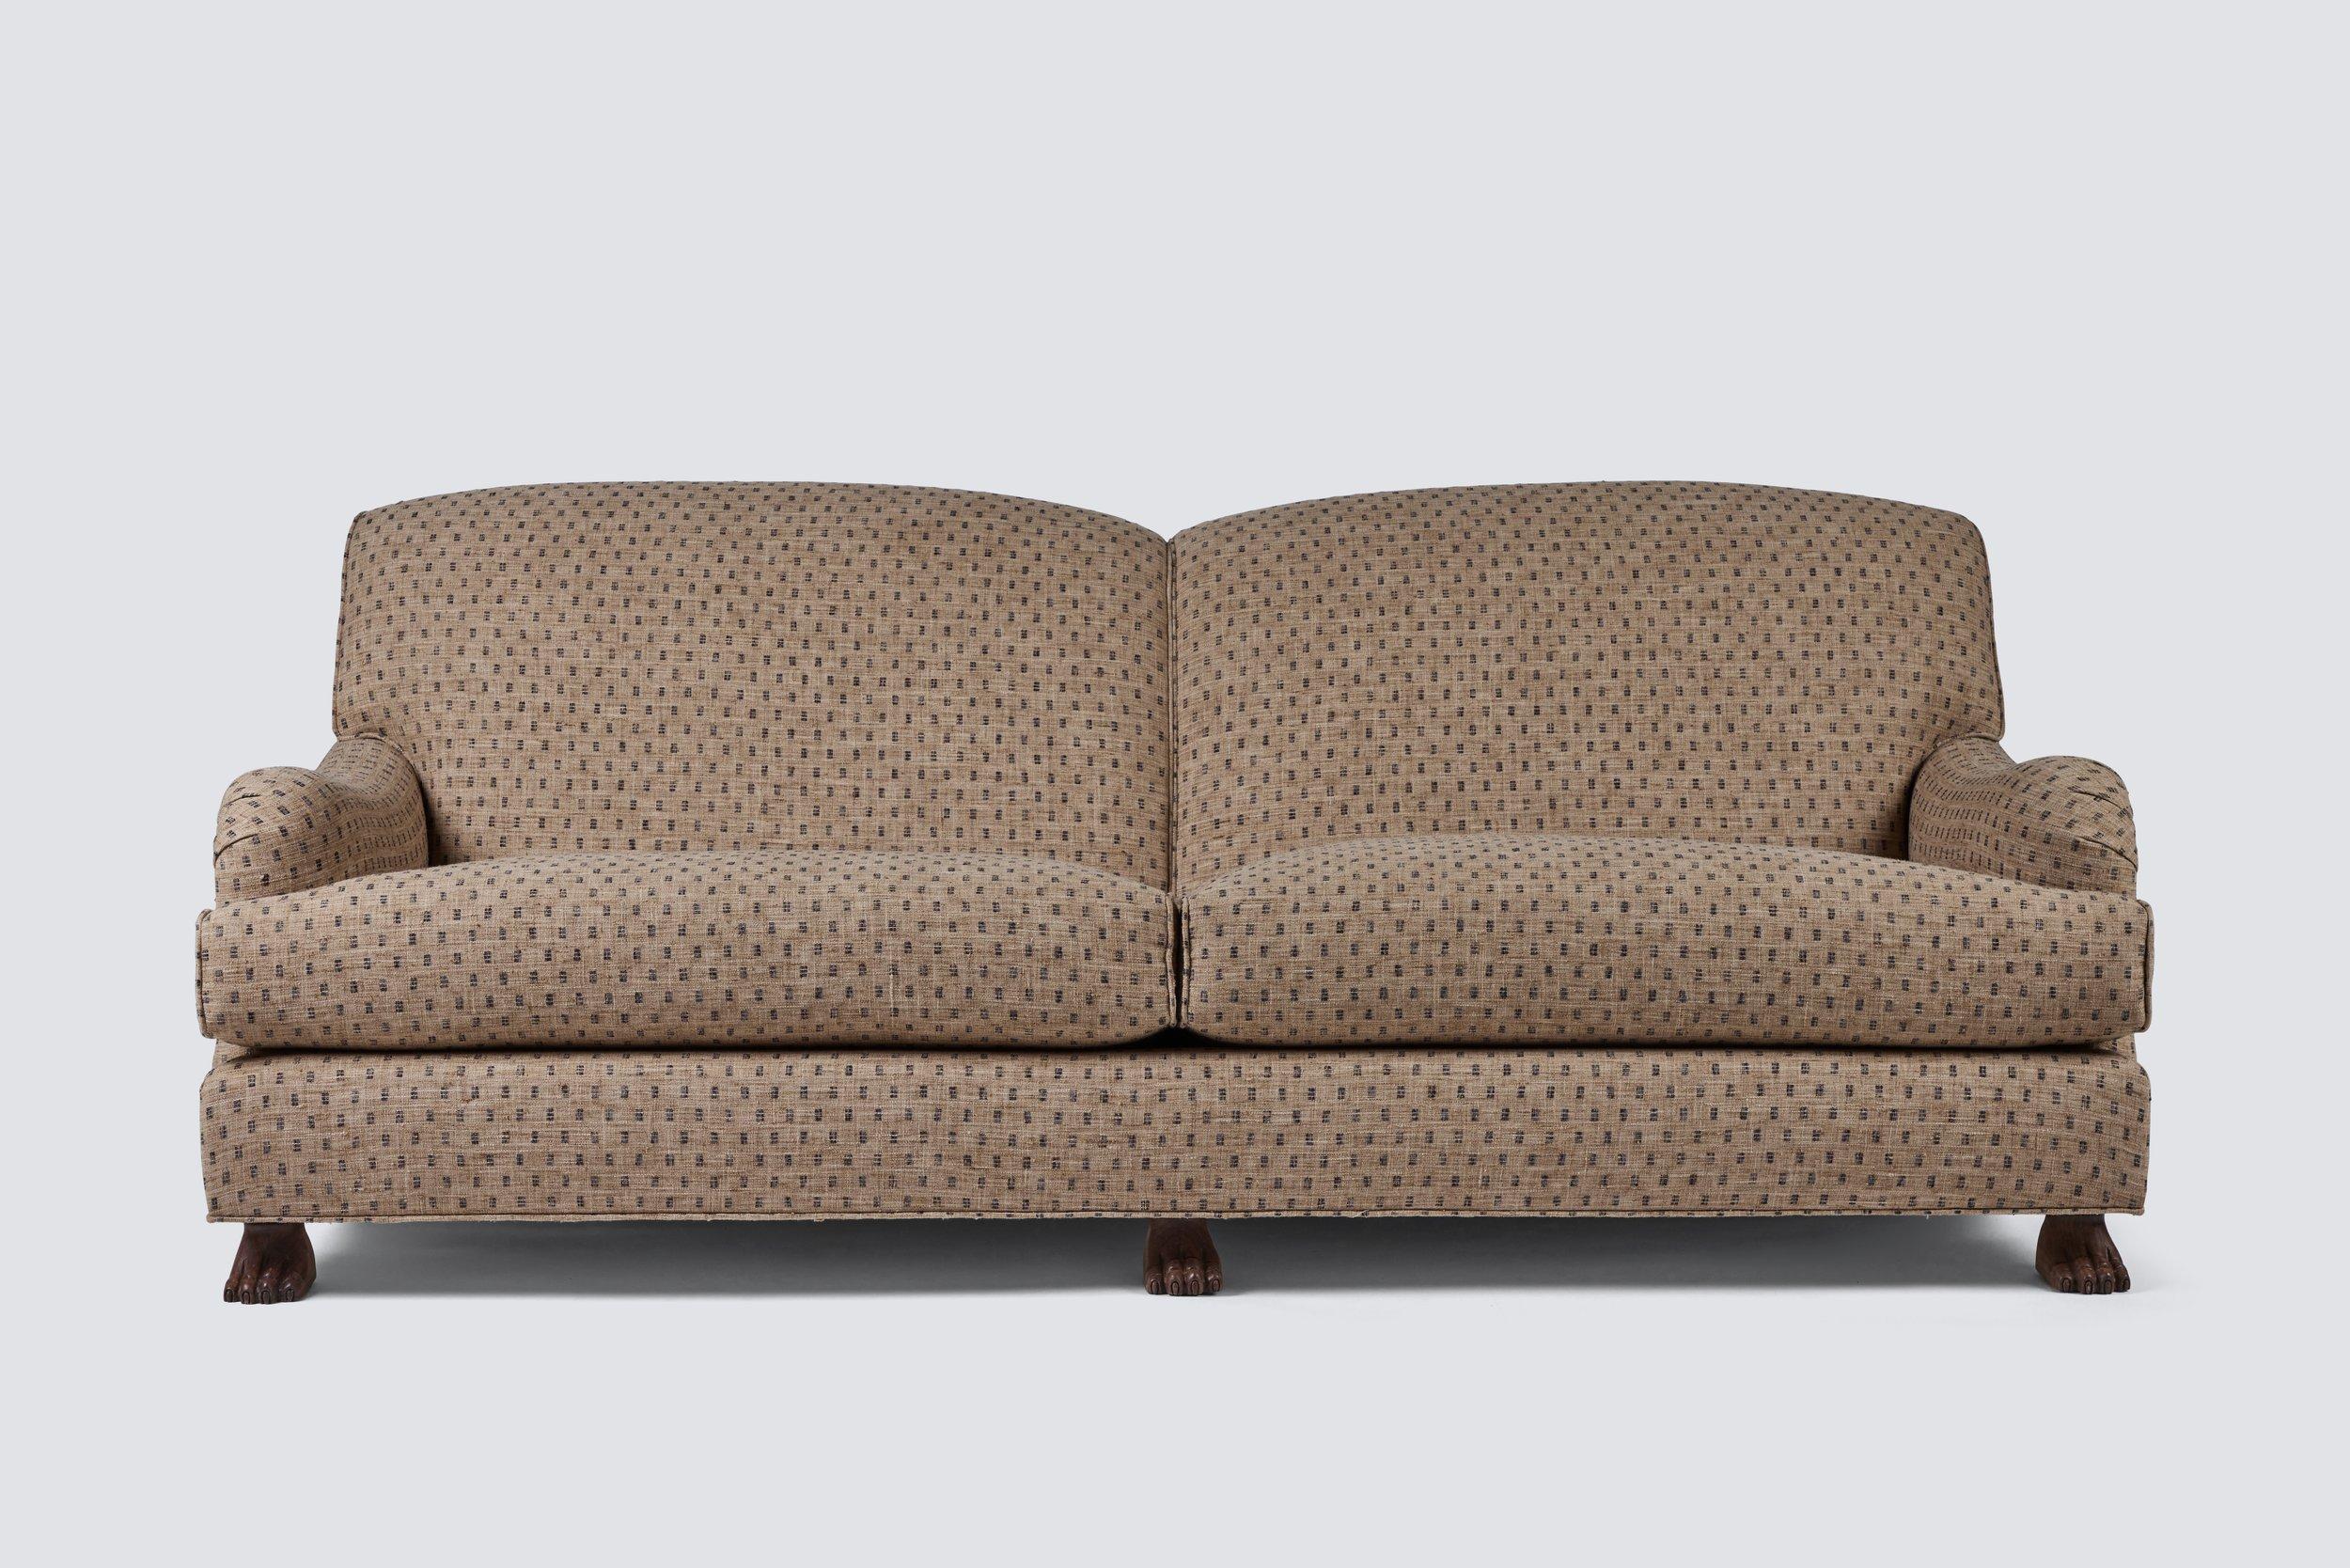 The Carl Sofa 84” is Martin & Brockett’s take on a traditional English roll arm, featuring our signature Lupa foot. A deep seat cushion and tight back make for a relaxed seating experience, uncompromised in style.

L 84 in. x D 42 in. x H 32